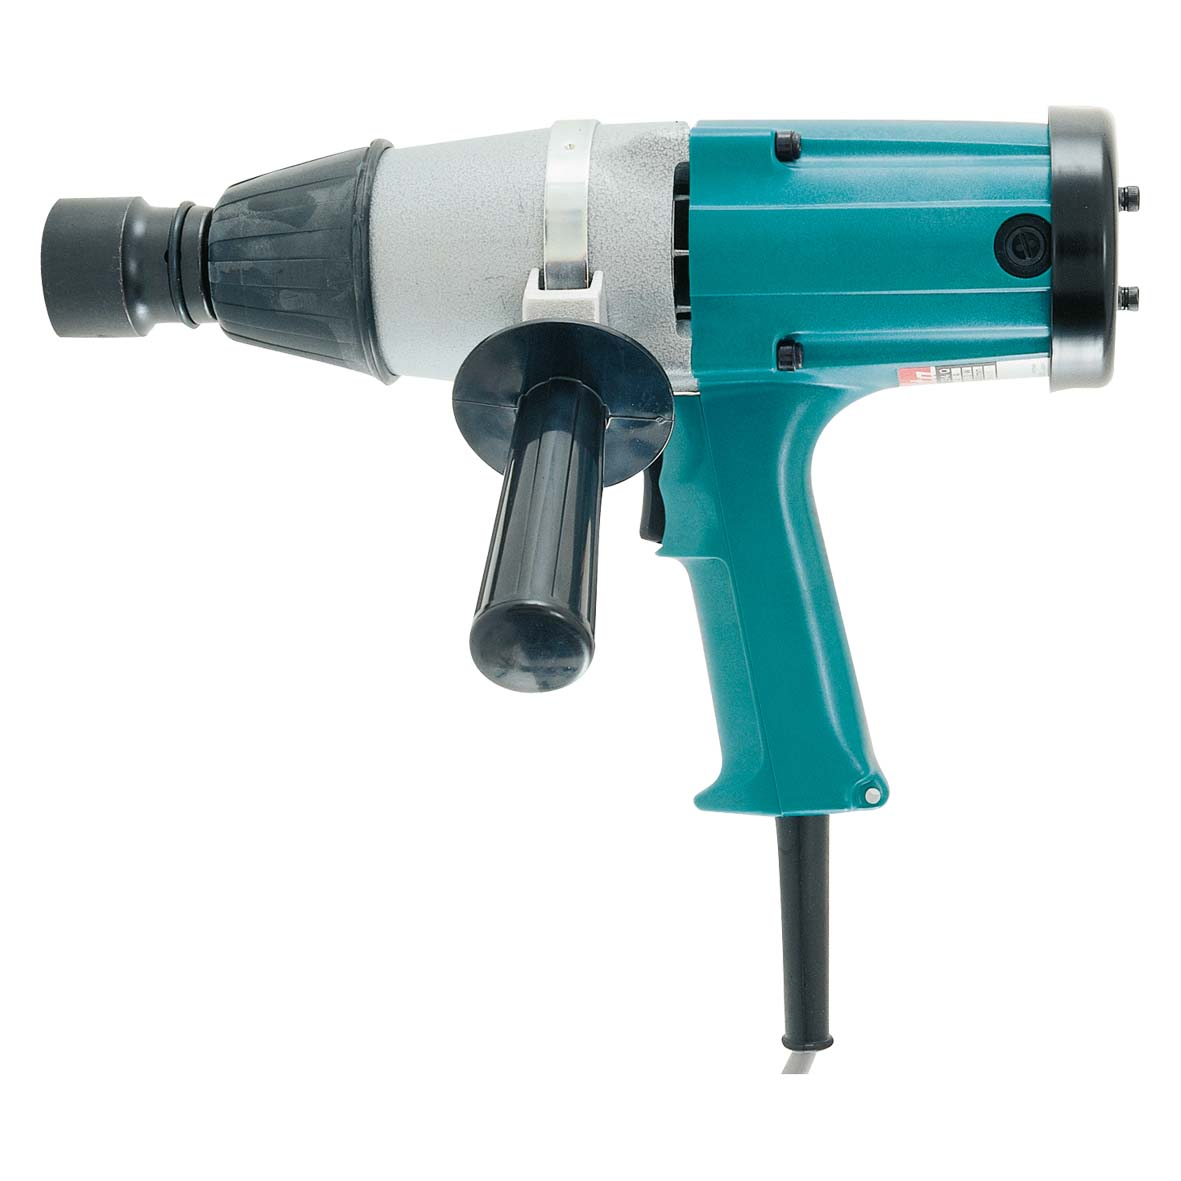 19mm Square Drive Impact Wrench 6906 by Makita